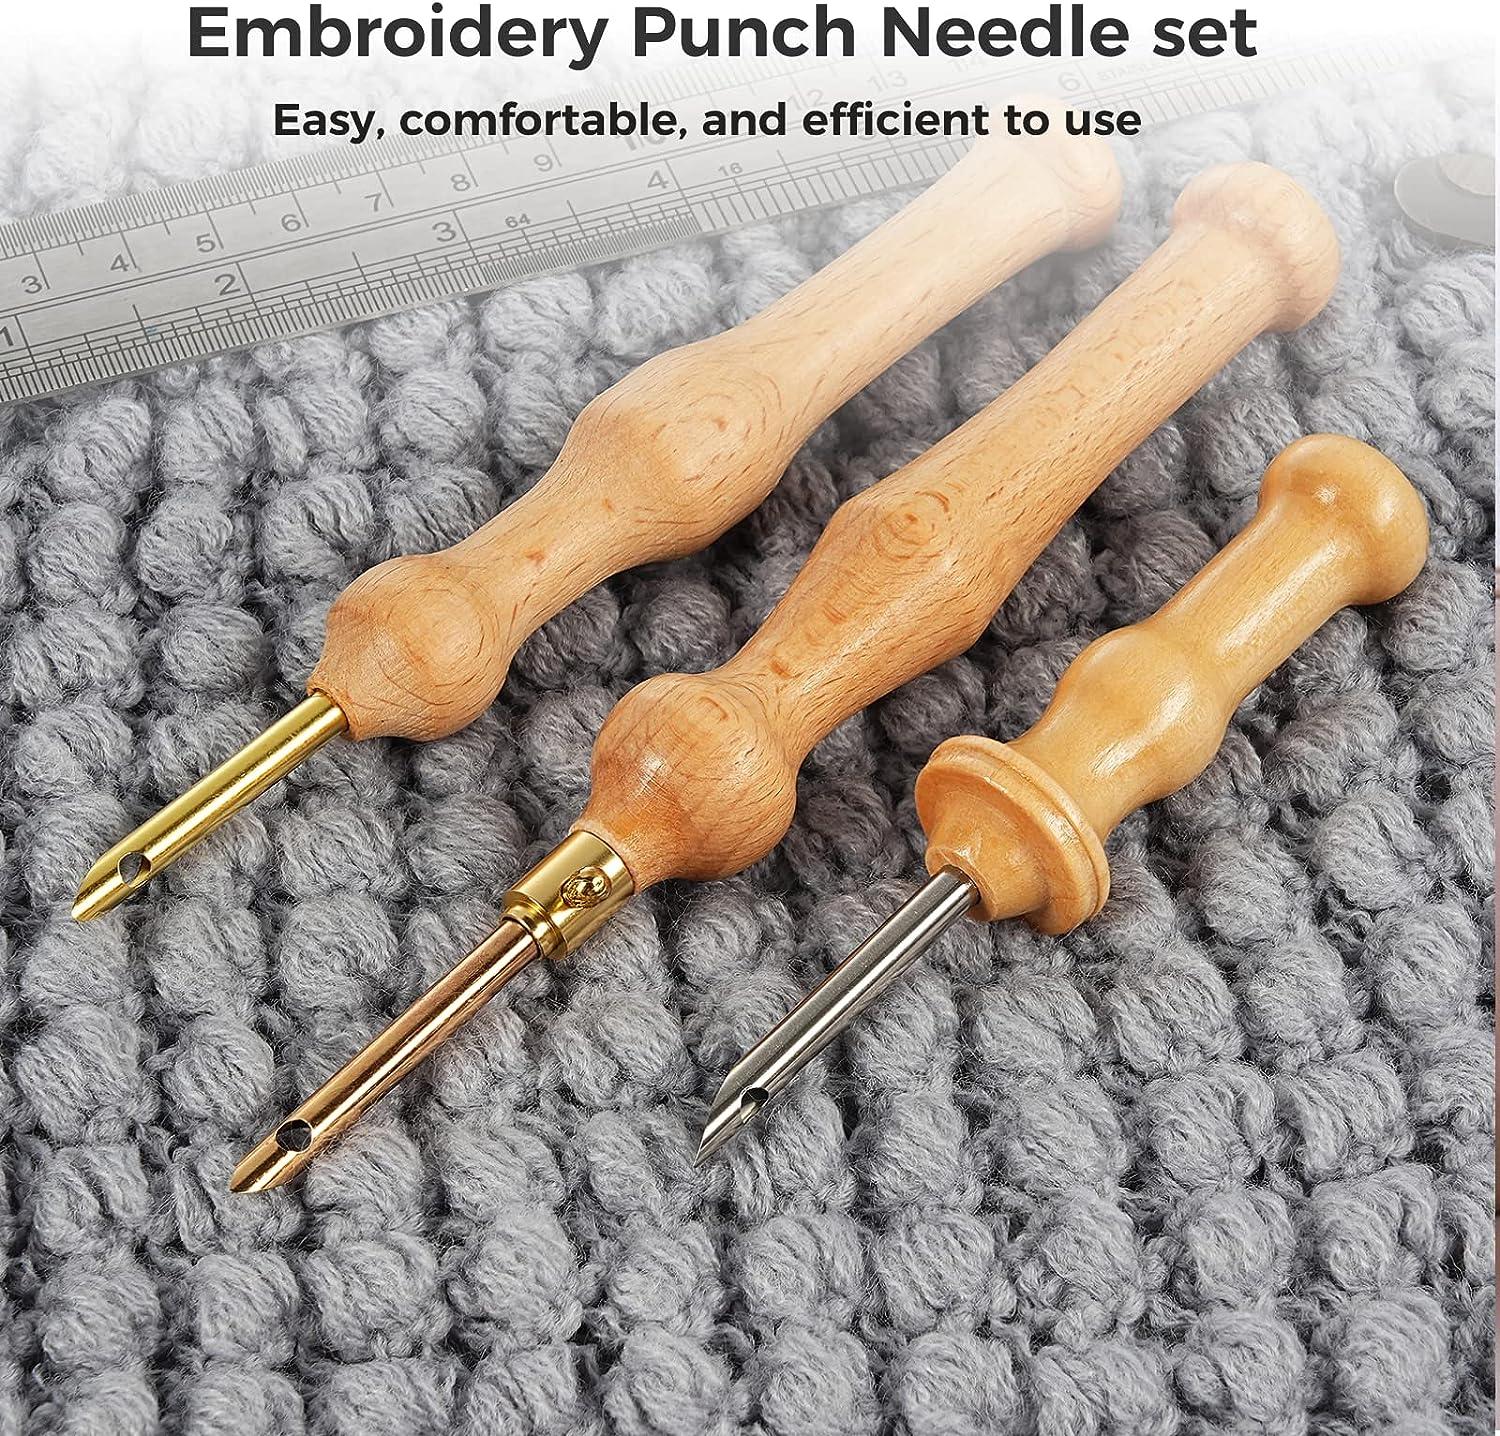 Durable Knitting Embroidery Pen Punch Needle Threader Set DIY Wood Handle  Sewing MRG